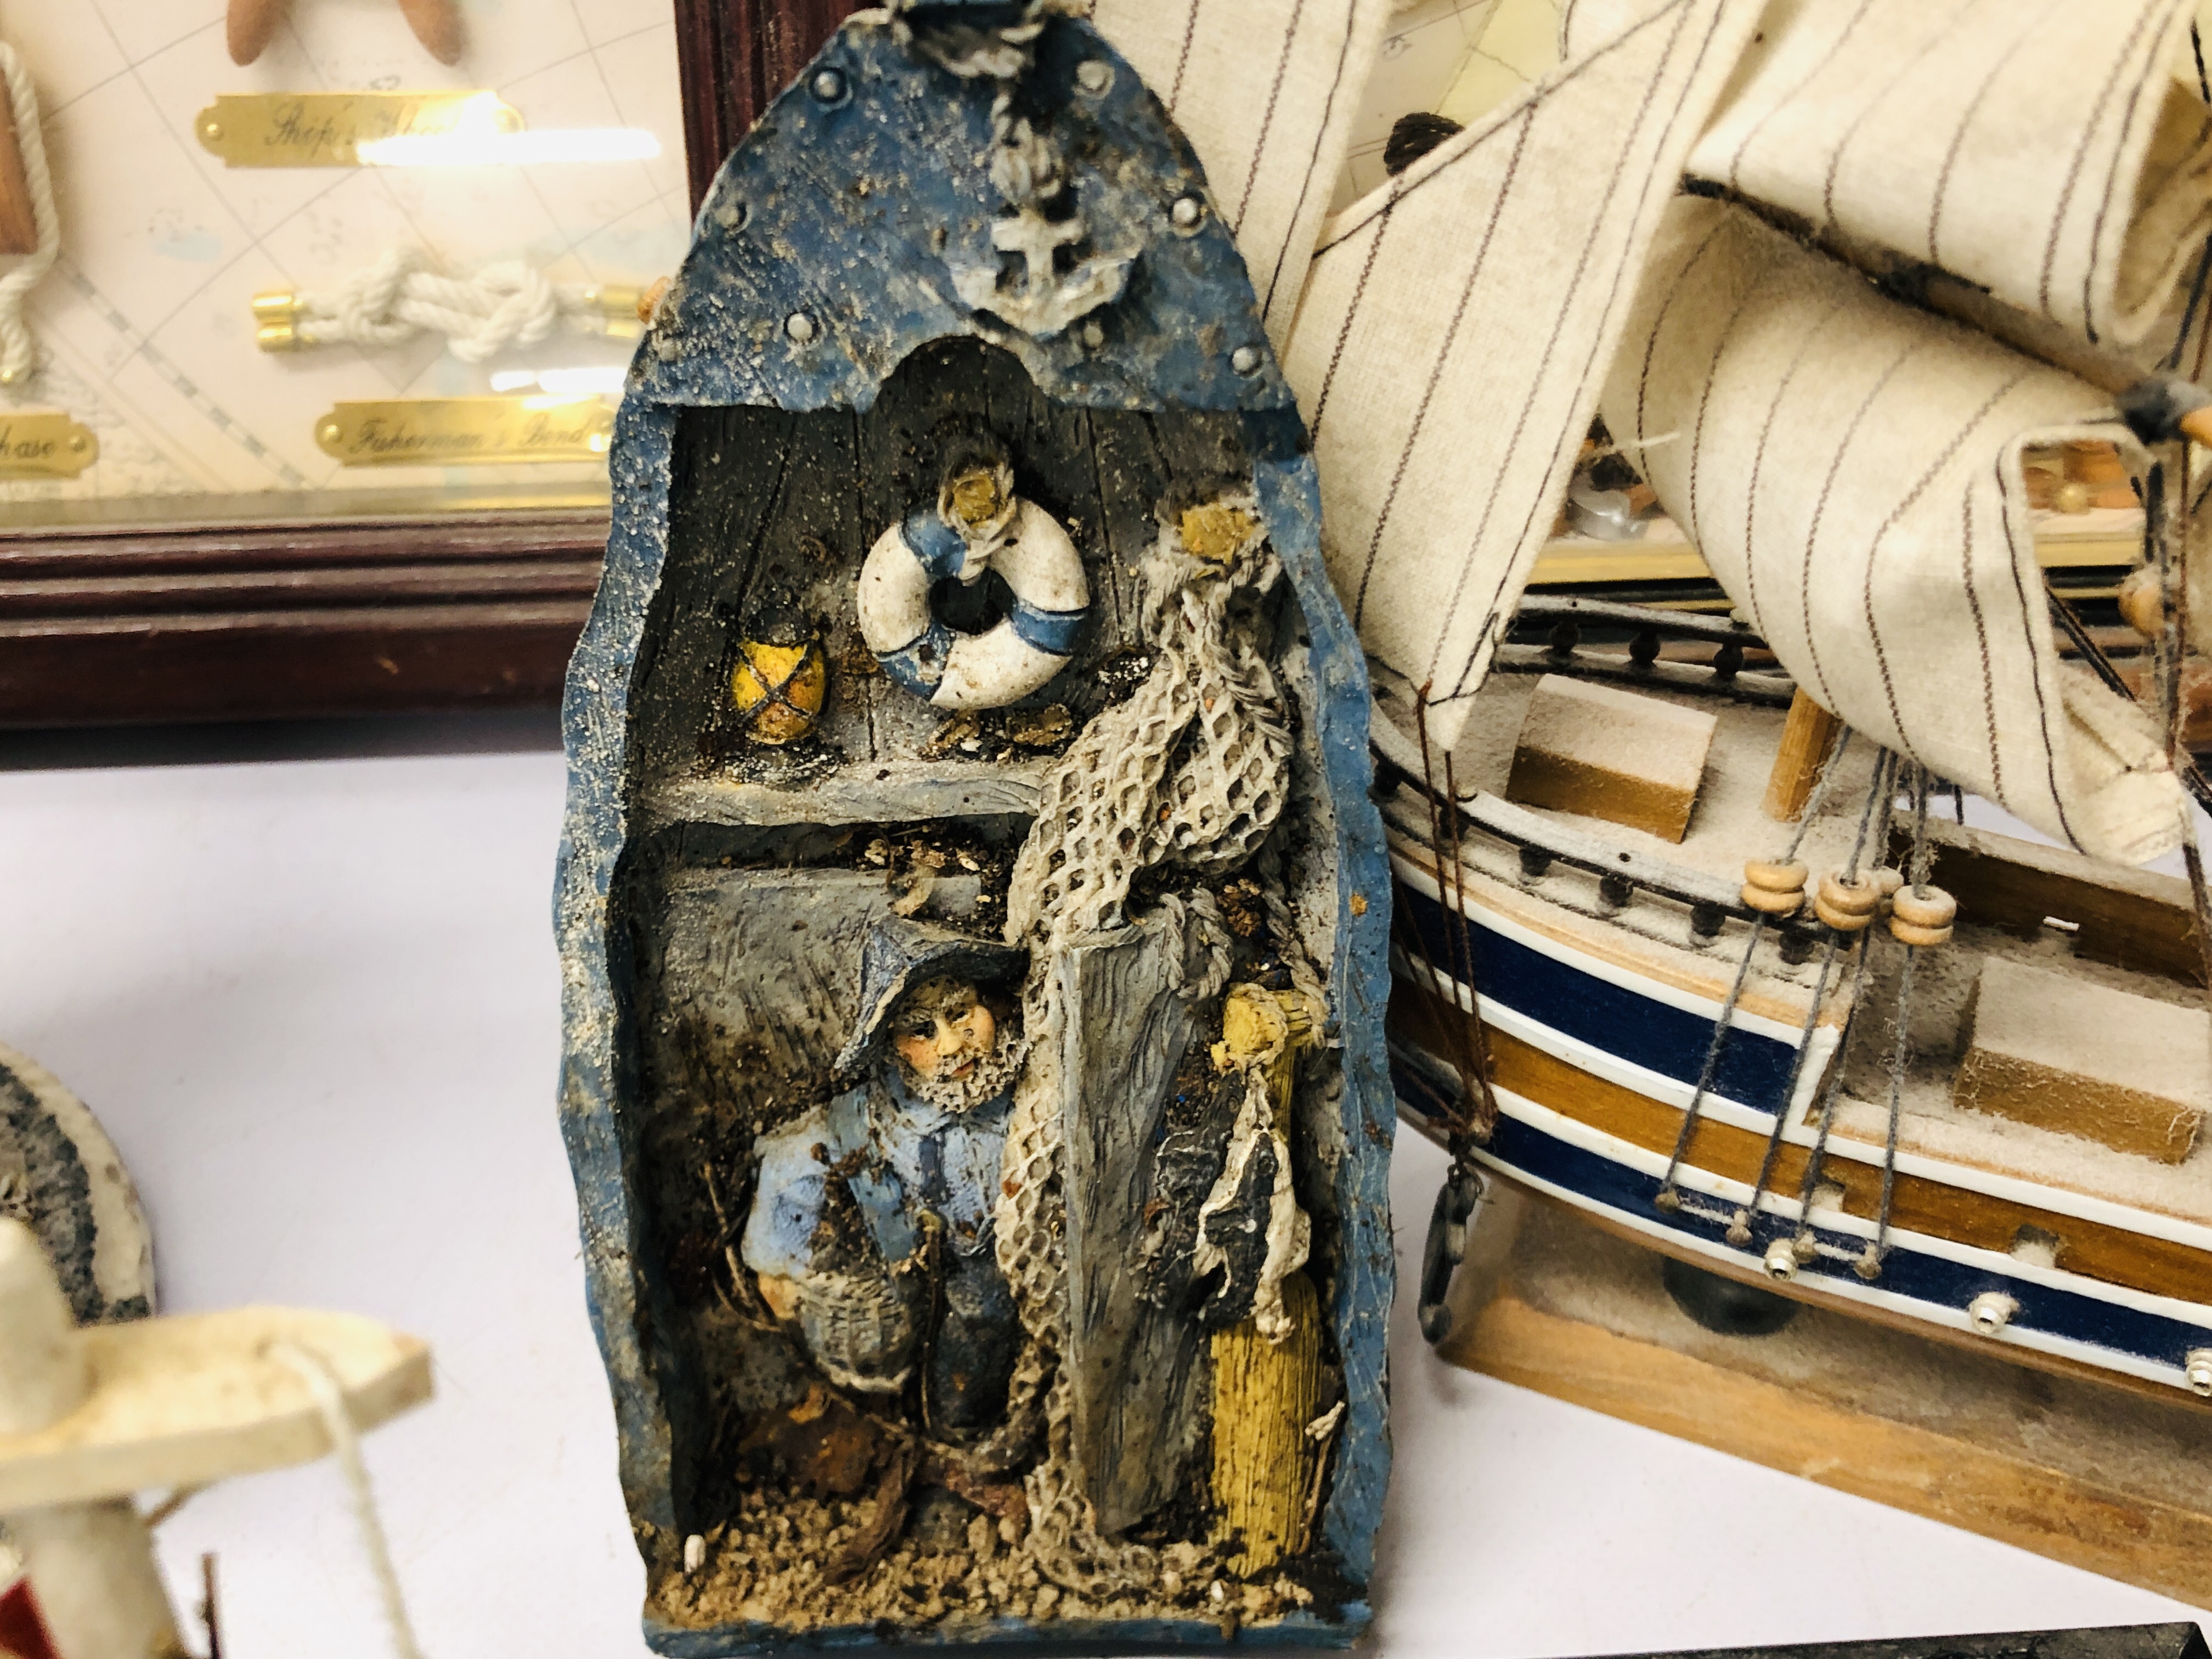 3 NAUTICAL 3D CASED DISPLAYS AND OTHER NAUTICAL ITEMS TO INCLUDE SAILING SHIPS, LIGHTHOUSES ETC. - Image 11 of 11